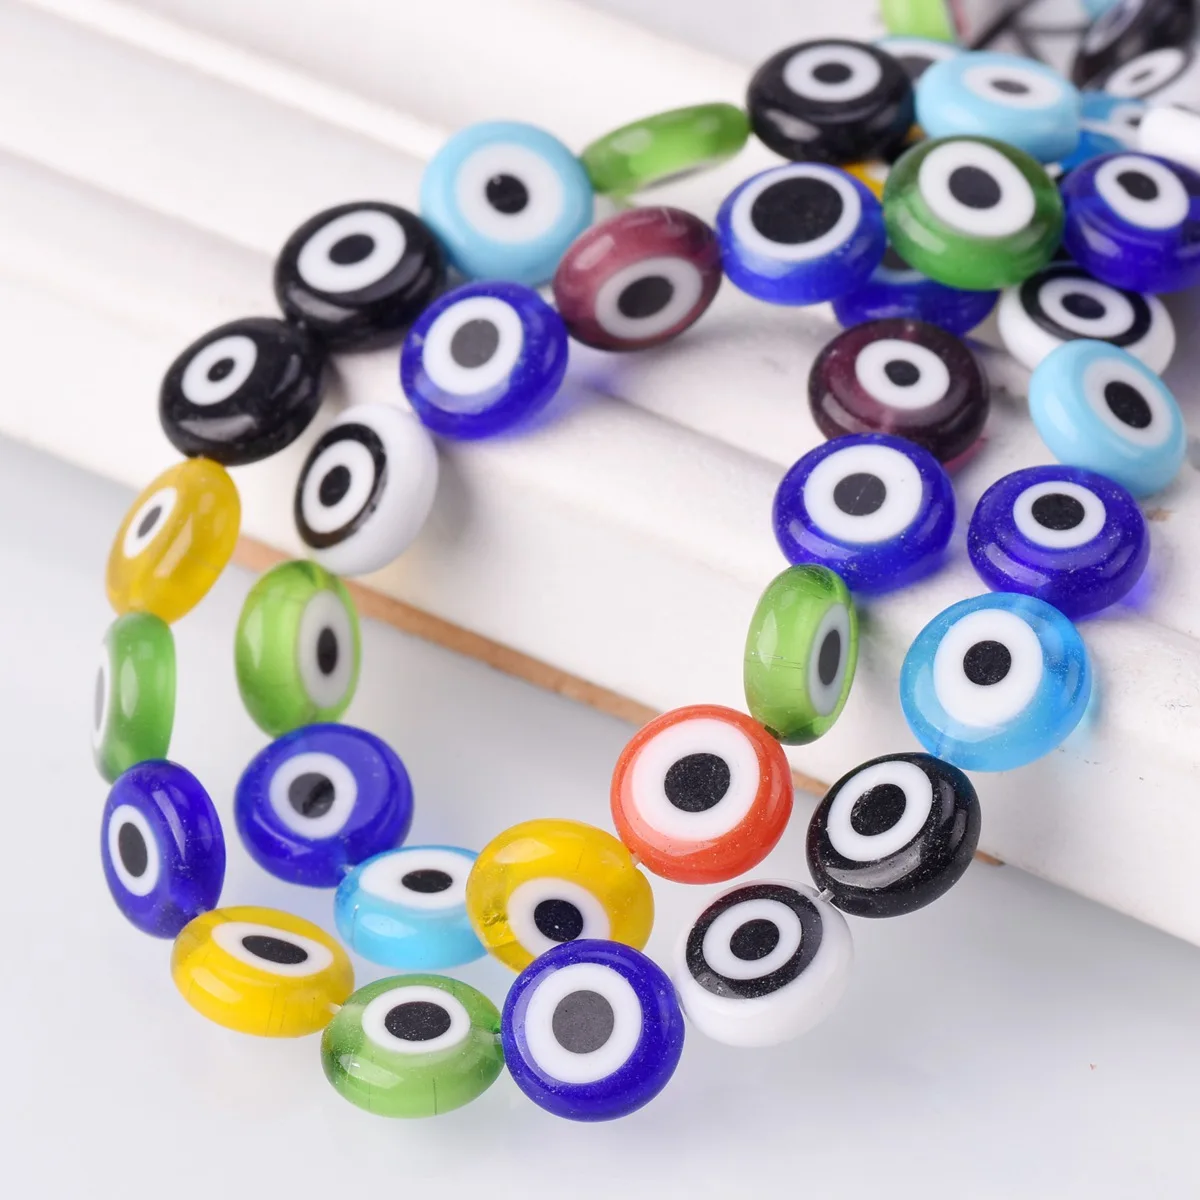 6mm 8mm 10mm 12mm Mixed Flat Round Evil Eye Millefiori Lampwork Glass Beads For Jewelry Making DIY Crafts Findings flat electric welding carbon electrode air pointed gouging gods 4mm 5mm 6mm 7mm 8mm 10mm 12mm